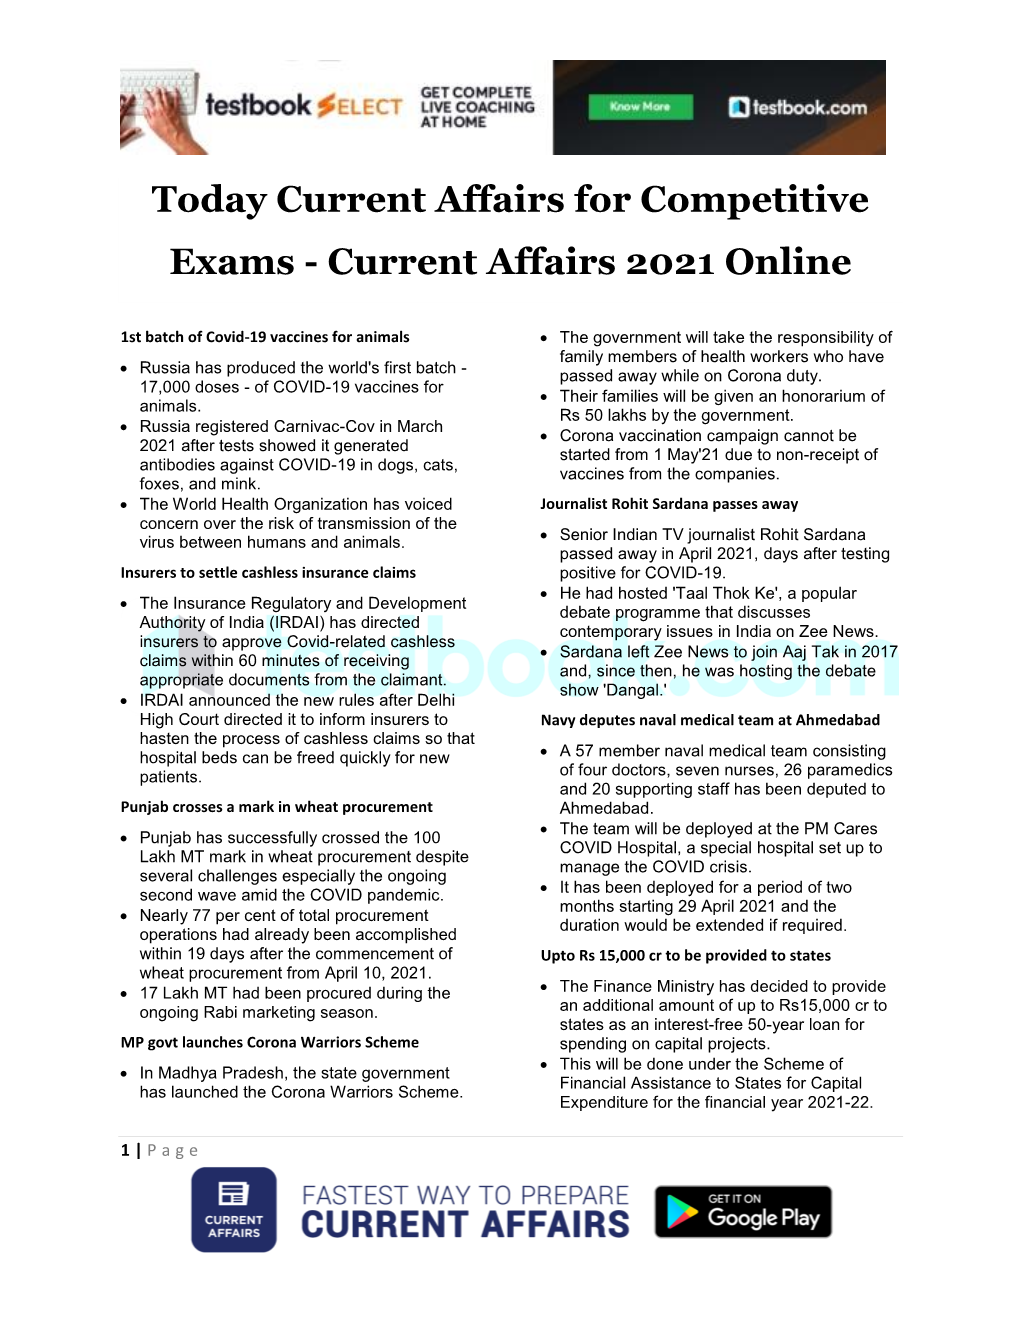 Today Current Affairs for Competitive Exams - Current Affairs 2021 Online